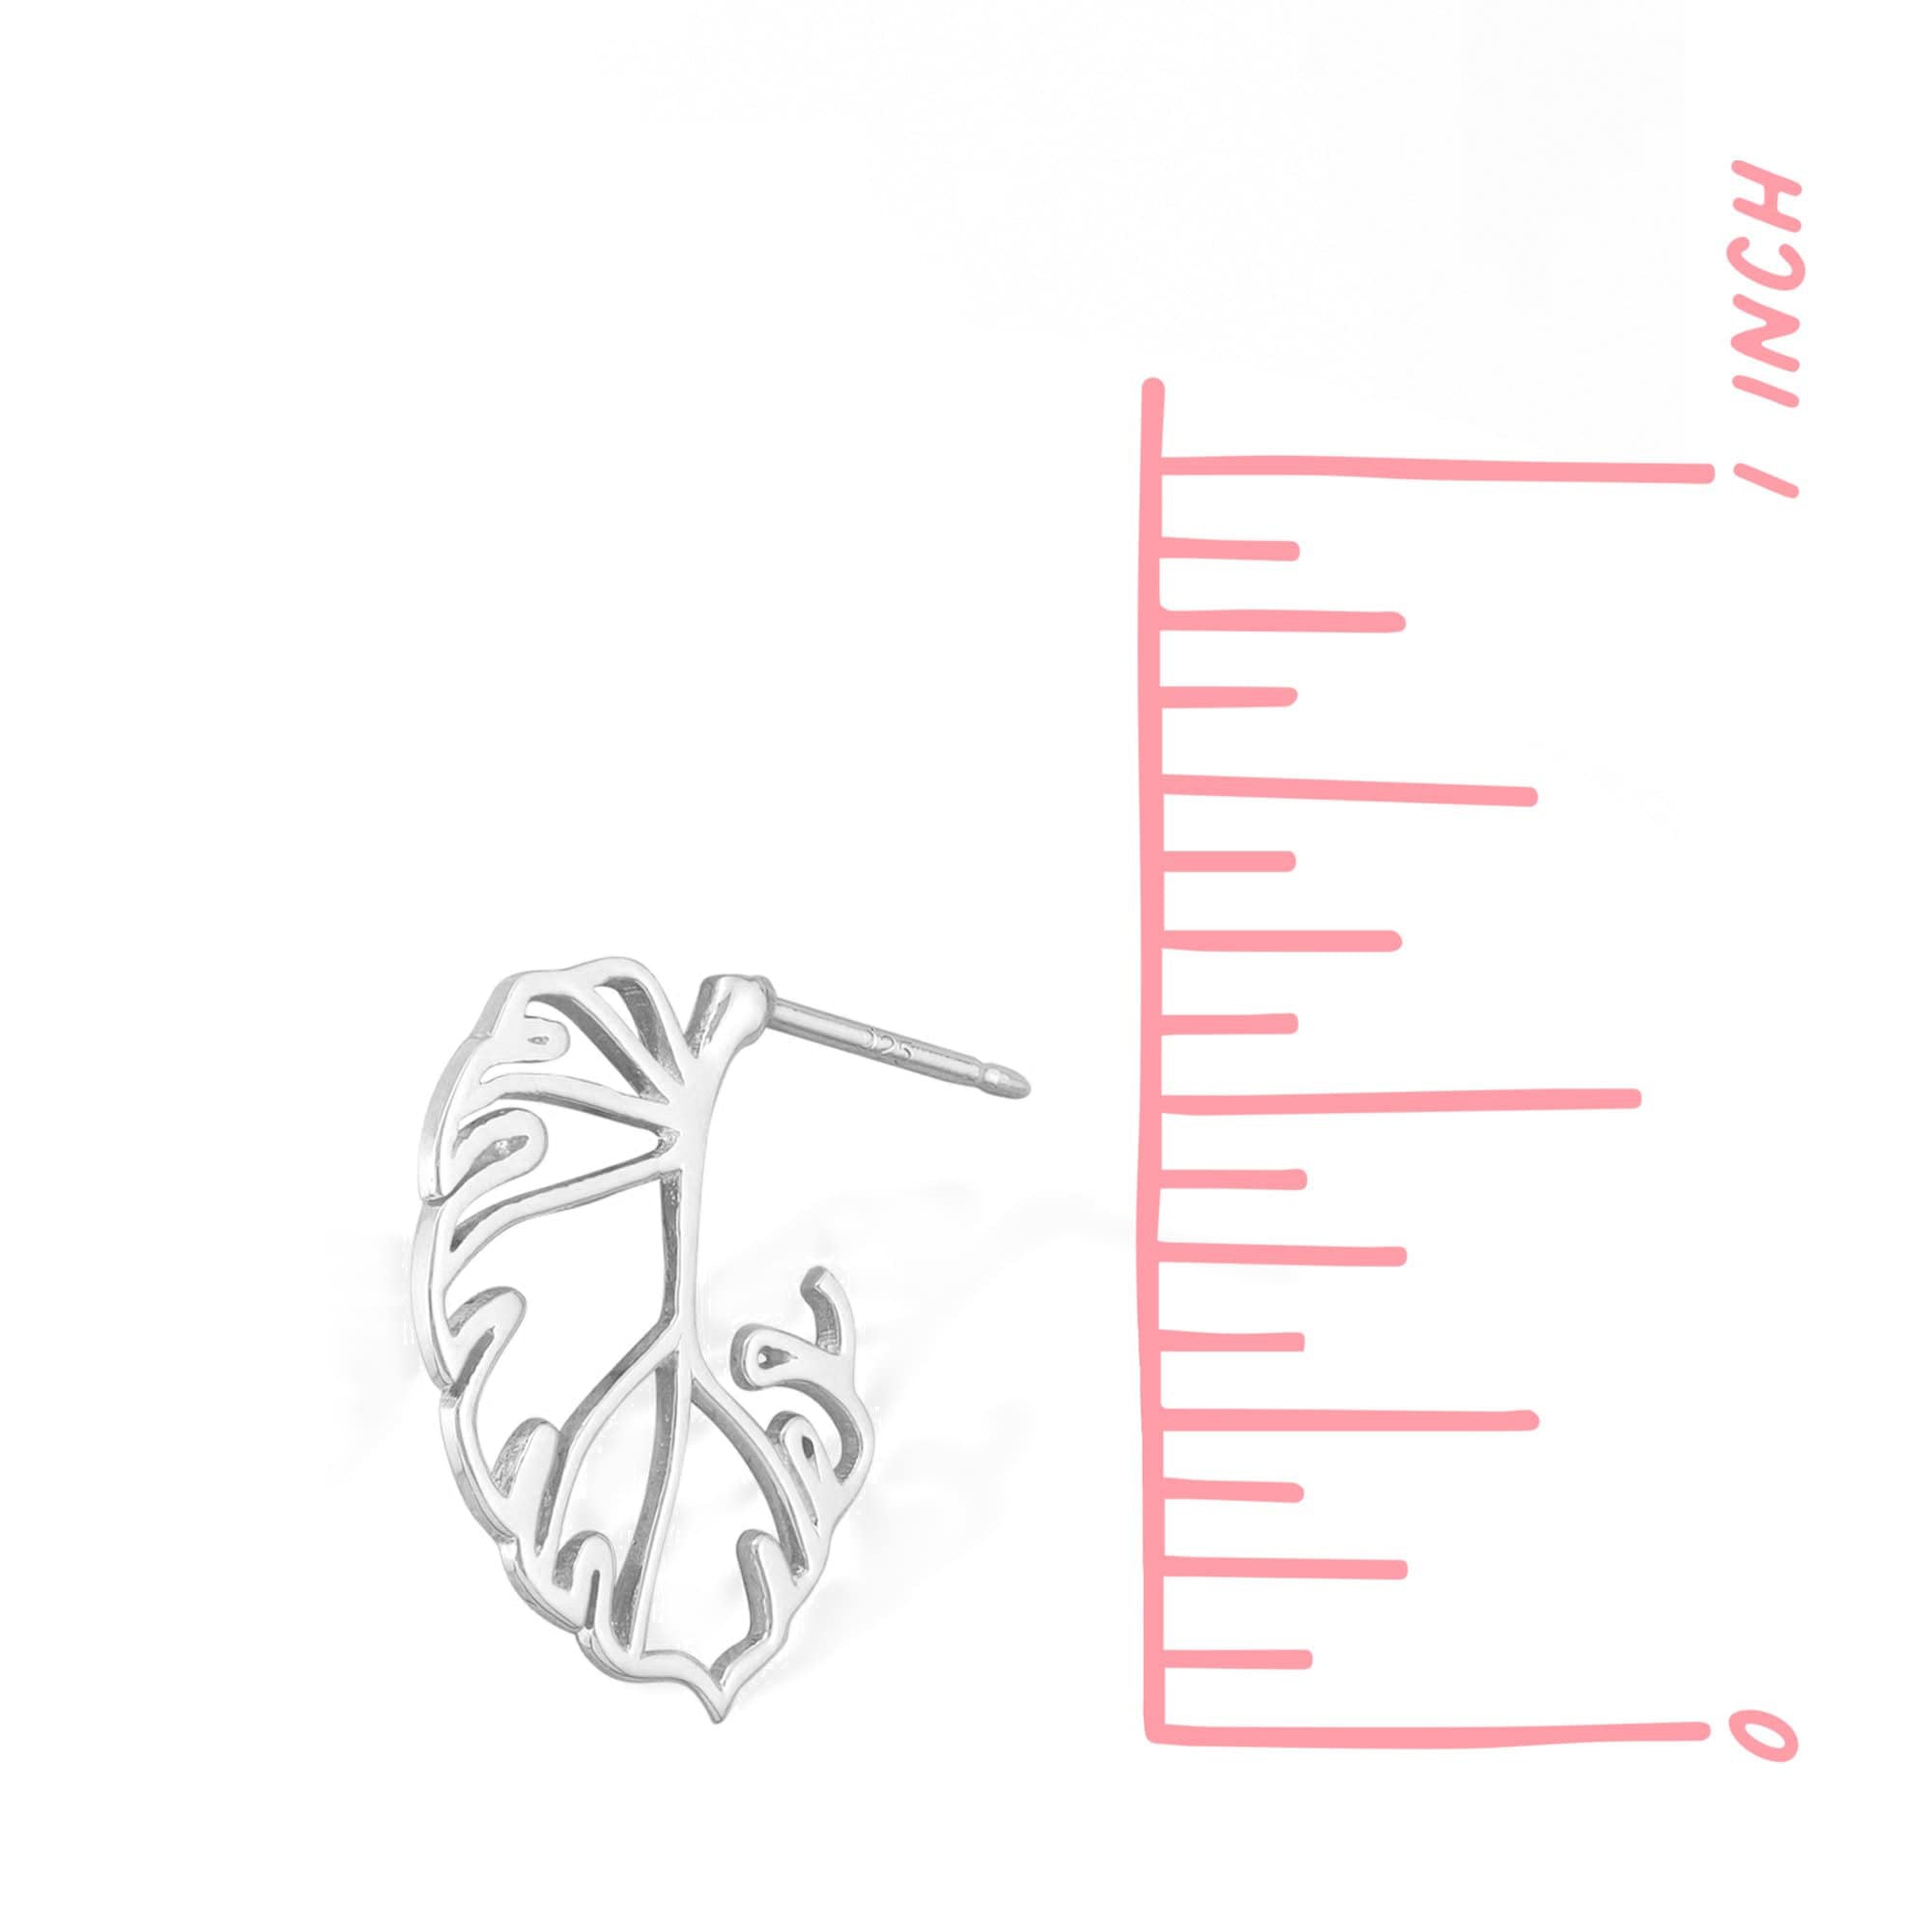 Boma Sterling Silver Wire Monstera Leaf Posts    